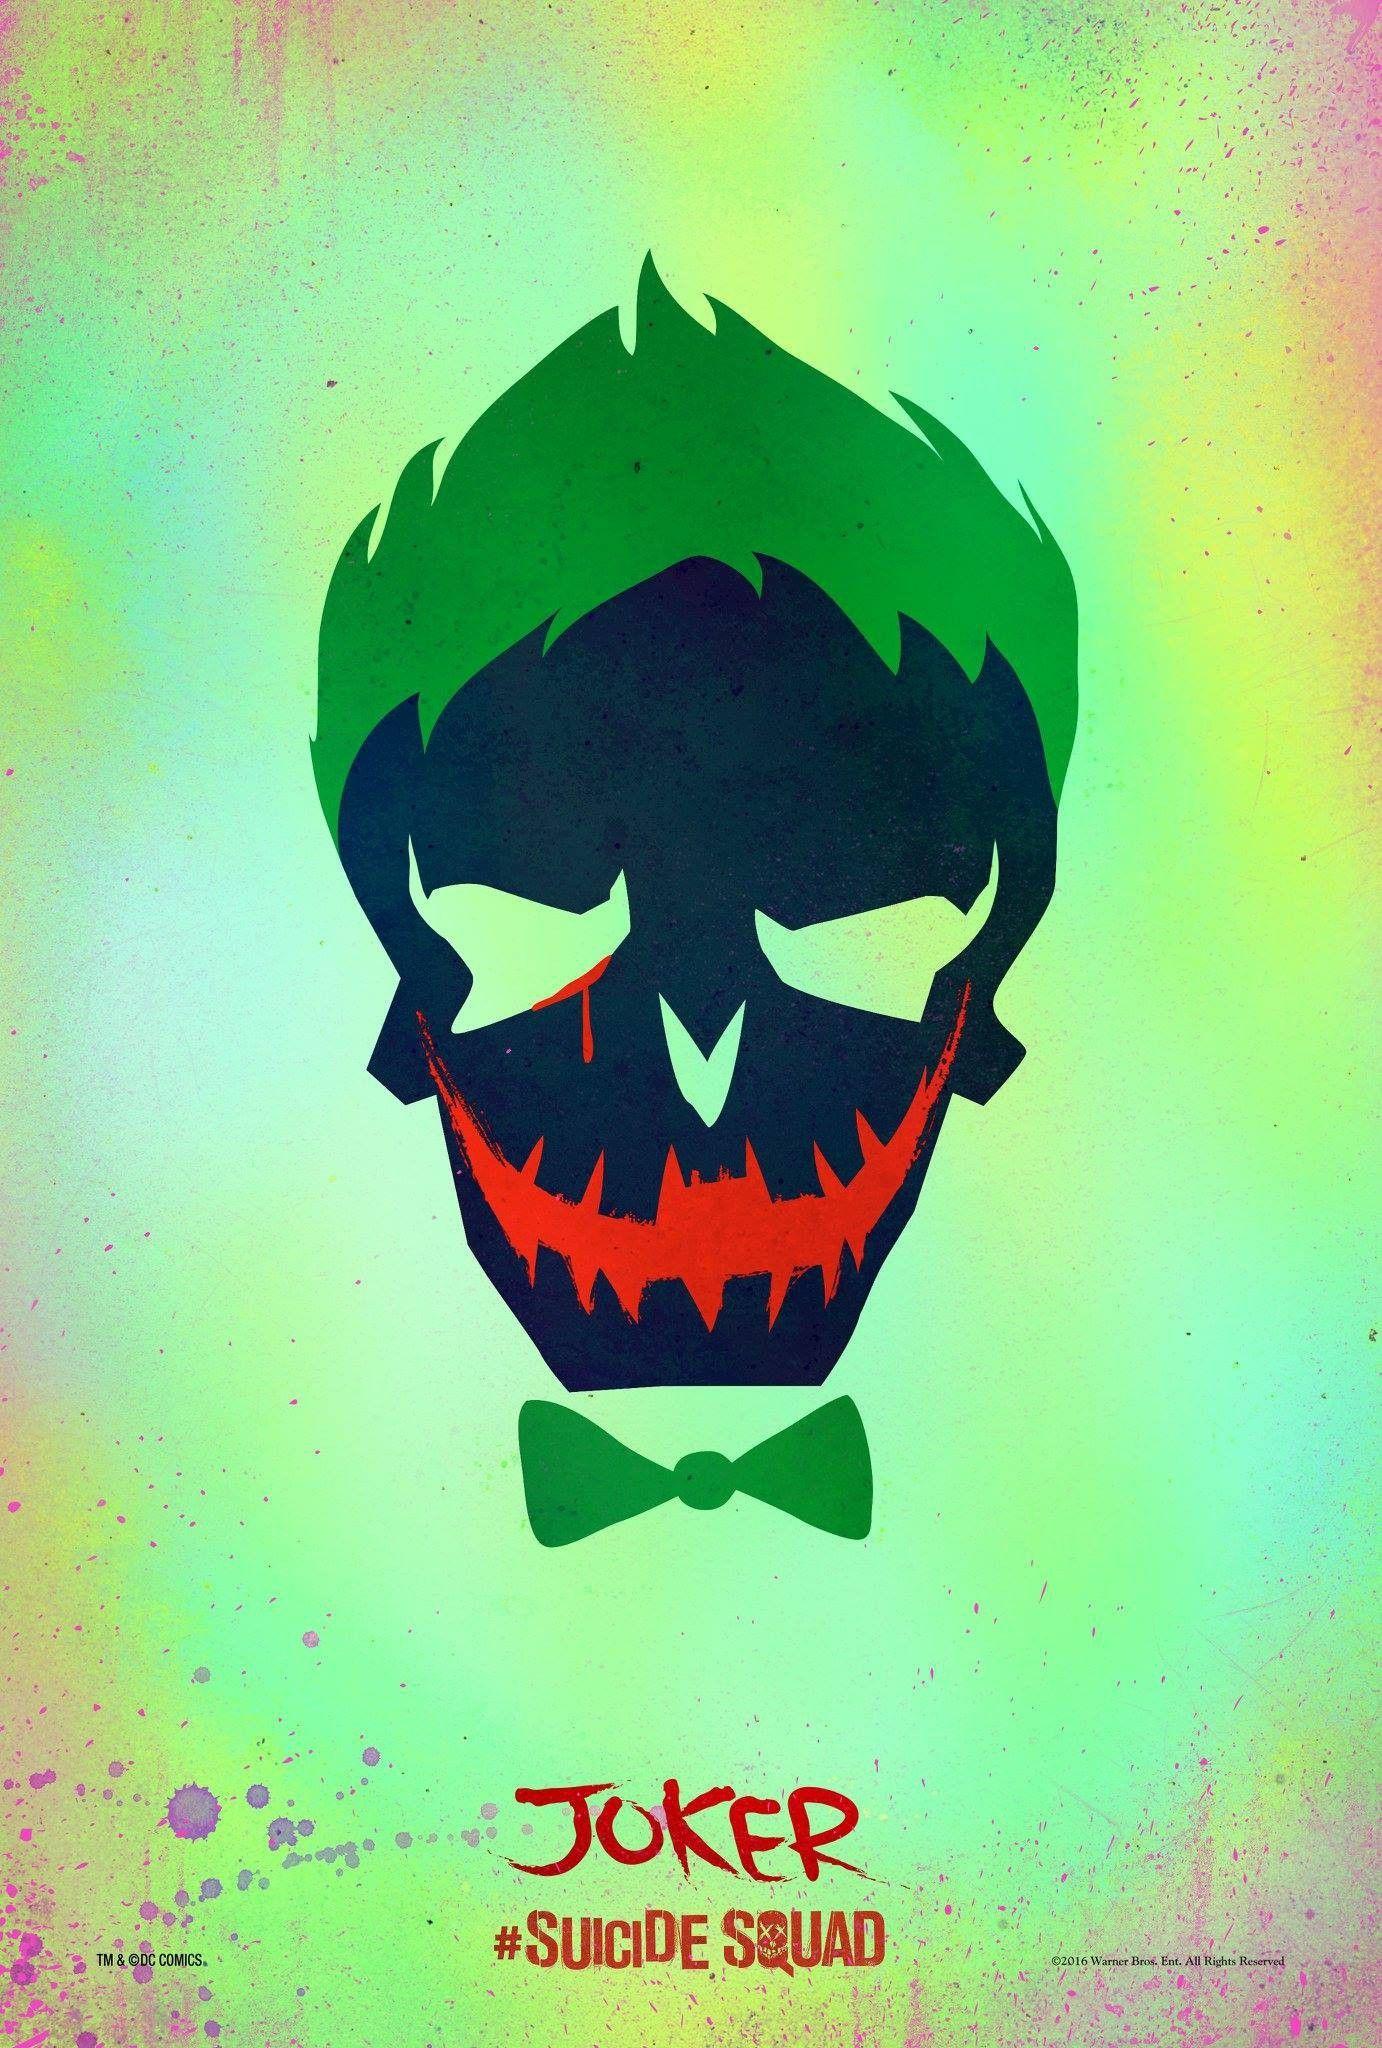 We can't wait to show you our Suicide Squad wallpaper!